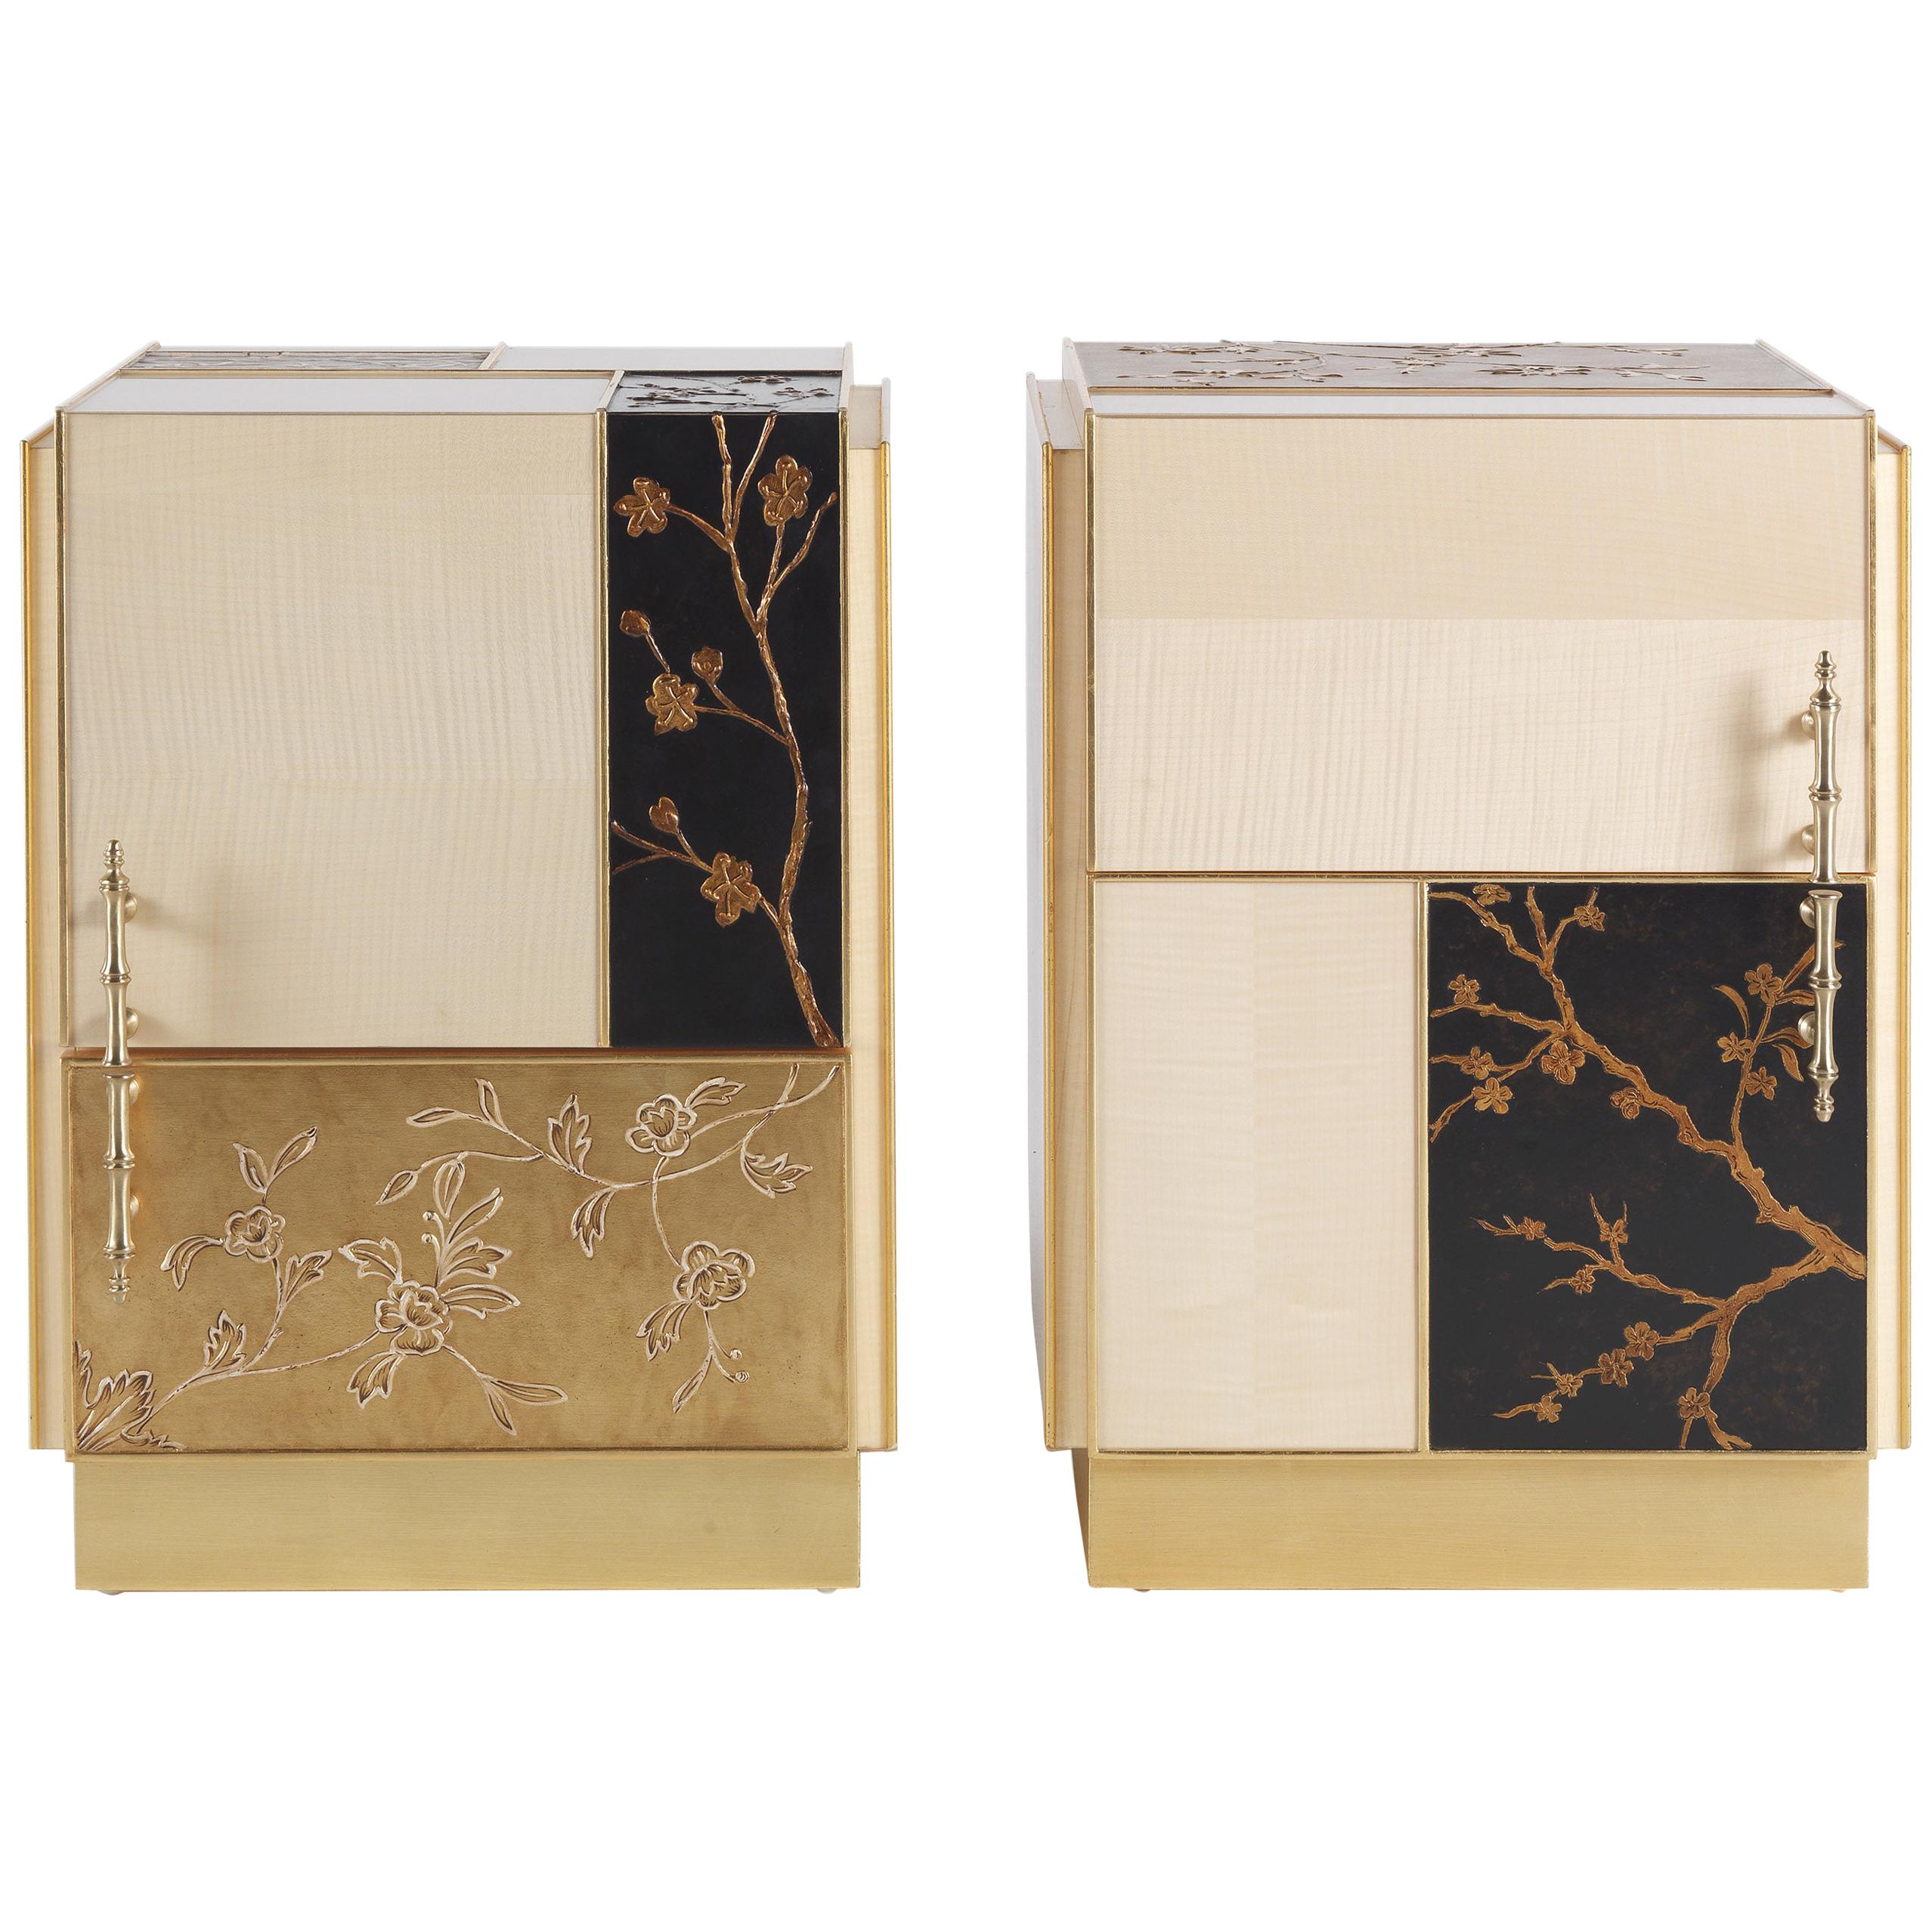 21st Century Ukiyo Side Table in Wood with Panels Decorated in Relief Plaster